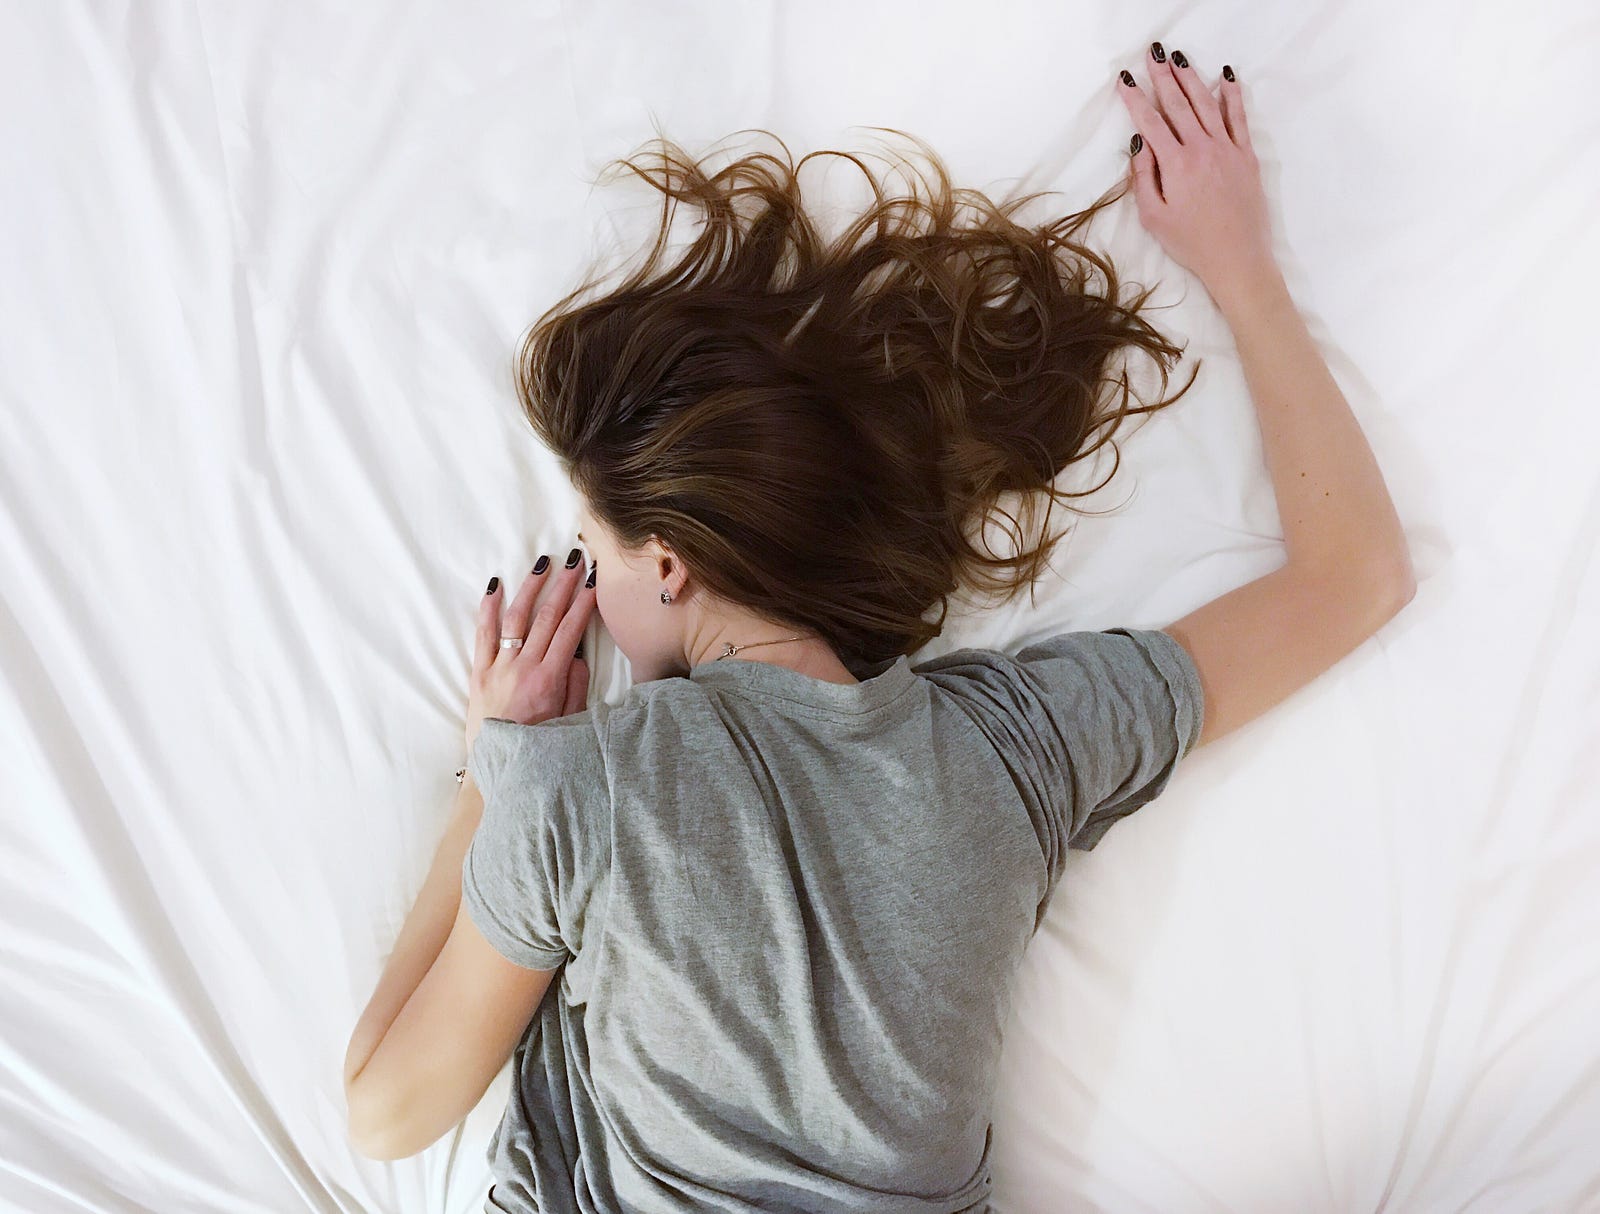 A young brunette lies prone on a bed with a white sheet. Her left arm is folded back against her face. Her left arm extends up. A new study shows that individuals taking daytime naps had significantly improved cognitive performance compared to those who stayed awake.